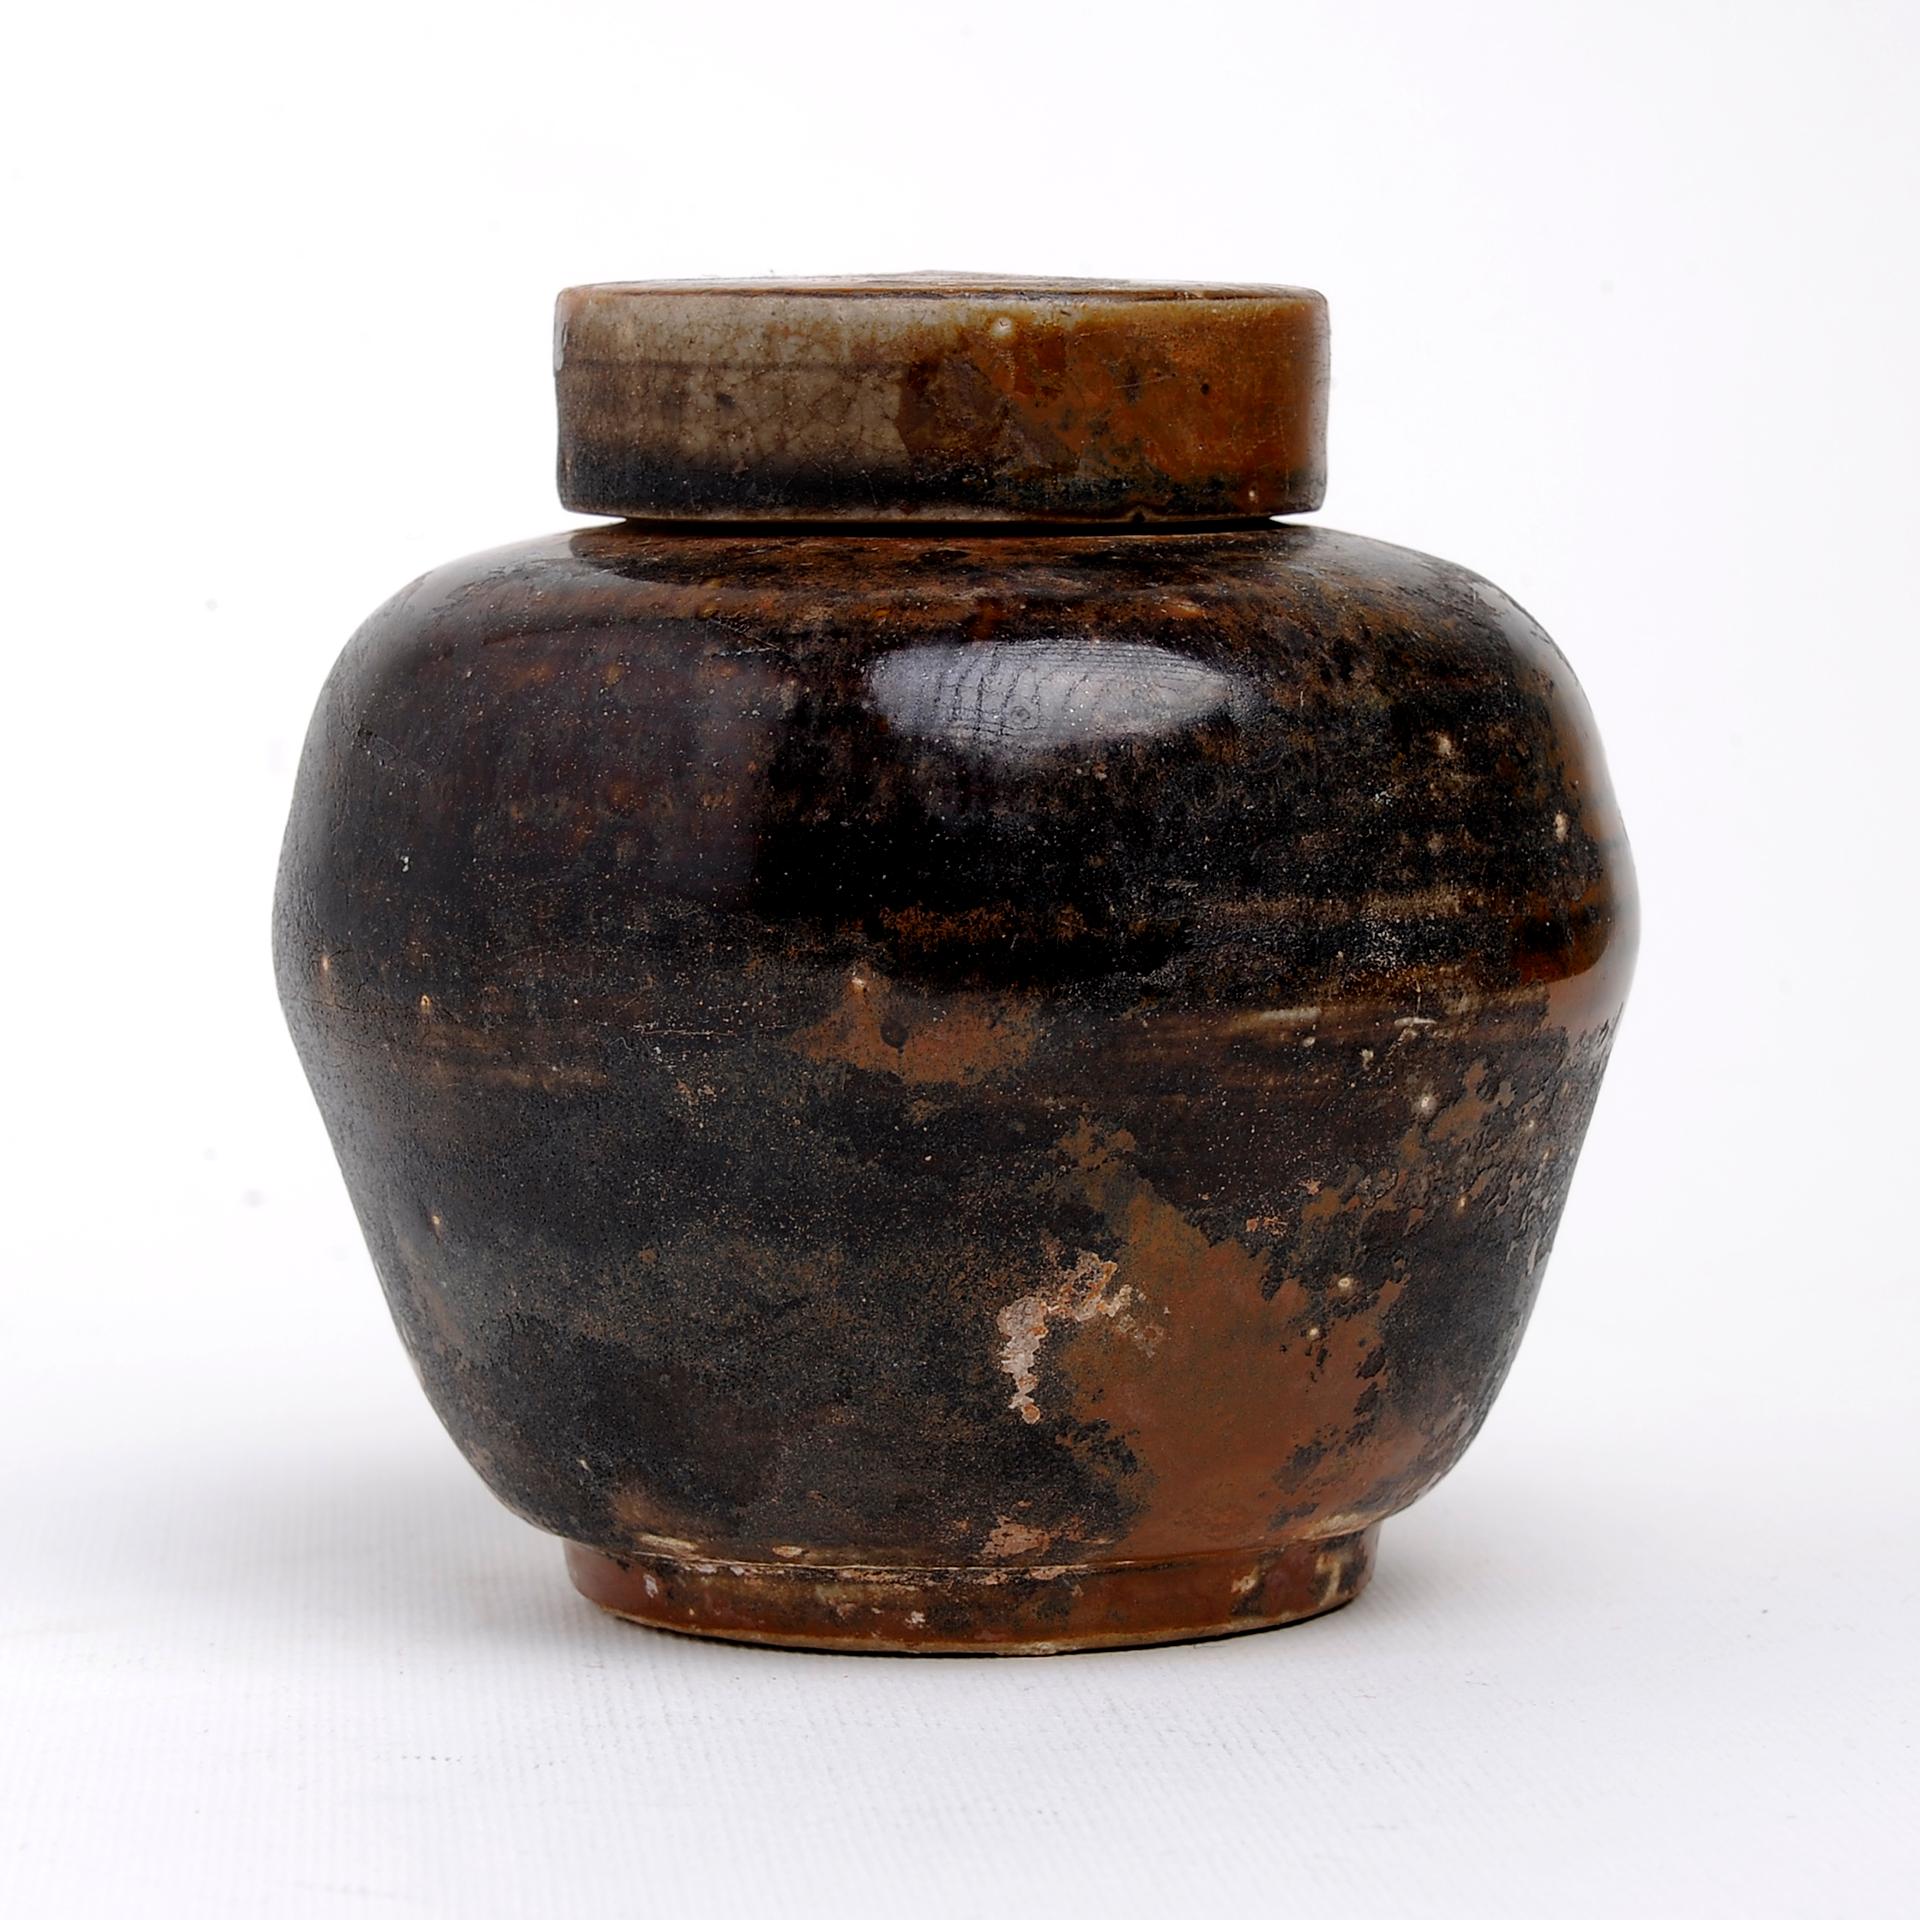 Antique China jar with lid, in brown ceramic or porcelain. From my personal collection of more than 40 years and never exhibited to the public. Look to other items published in this month on 1stdibs.
Now i want to close my activities, therefore I